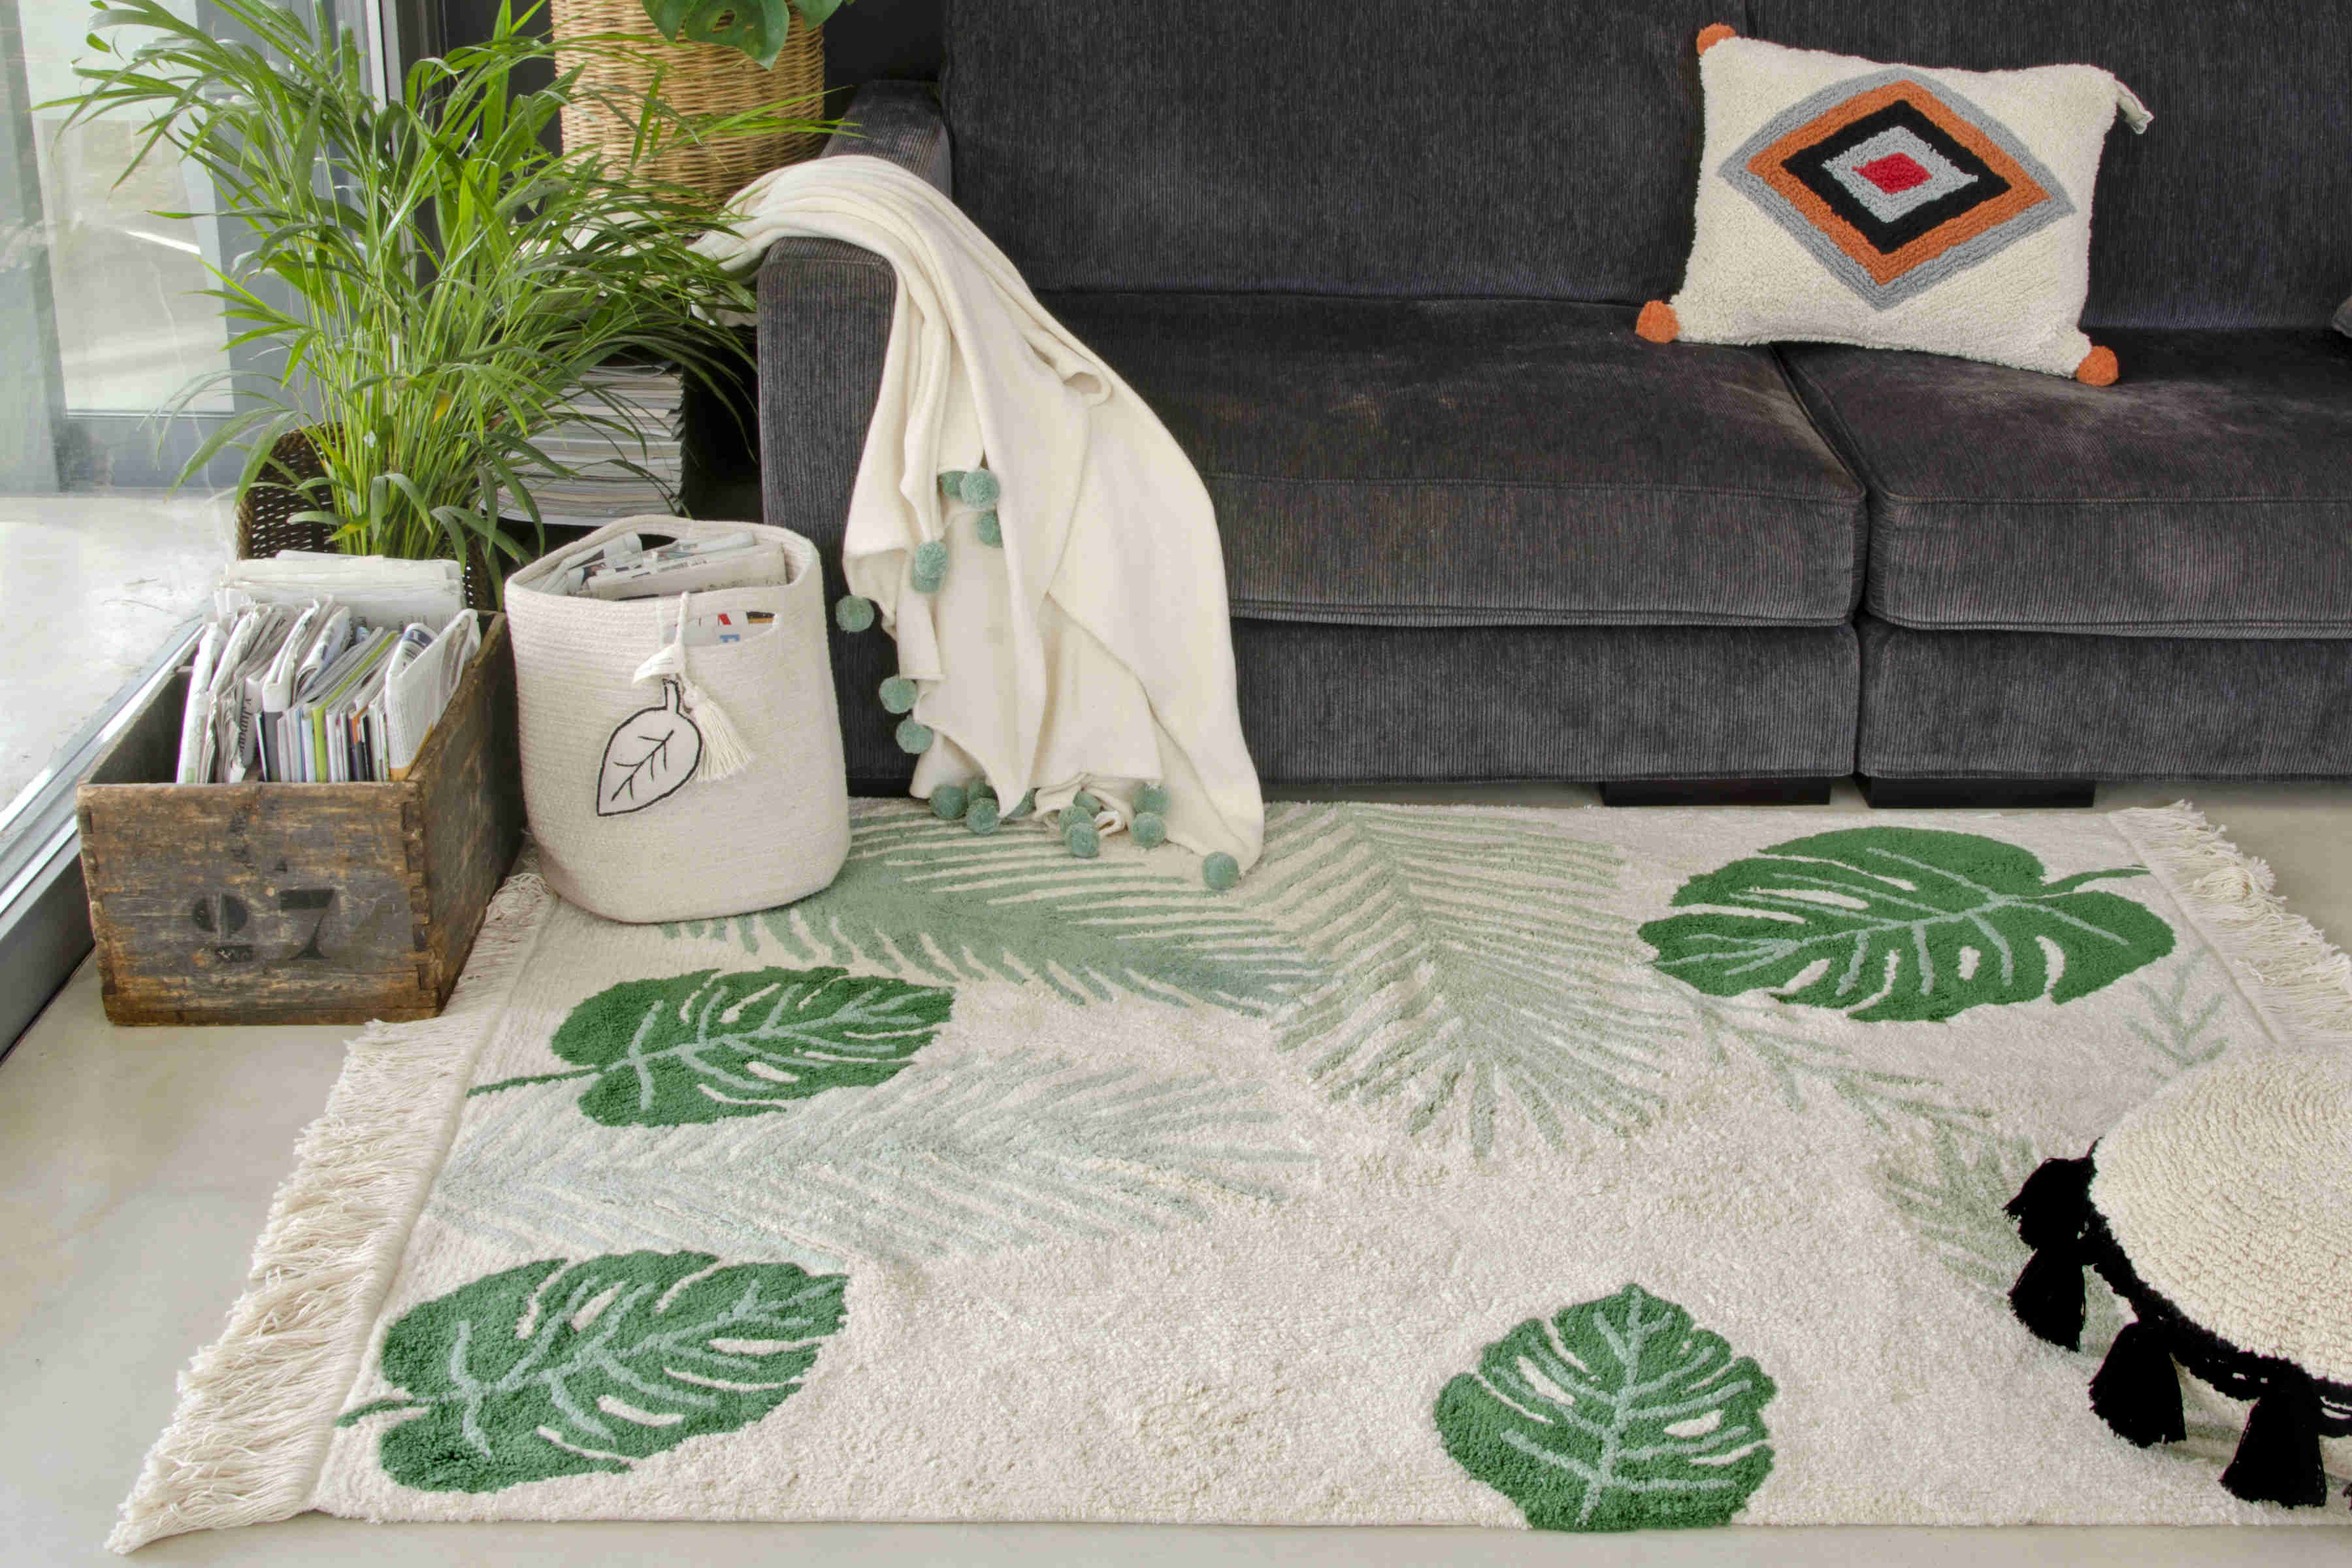 Rectangular beige cotton rug decorated with large green leaves and a fringed border